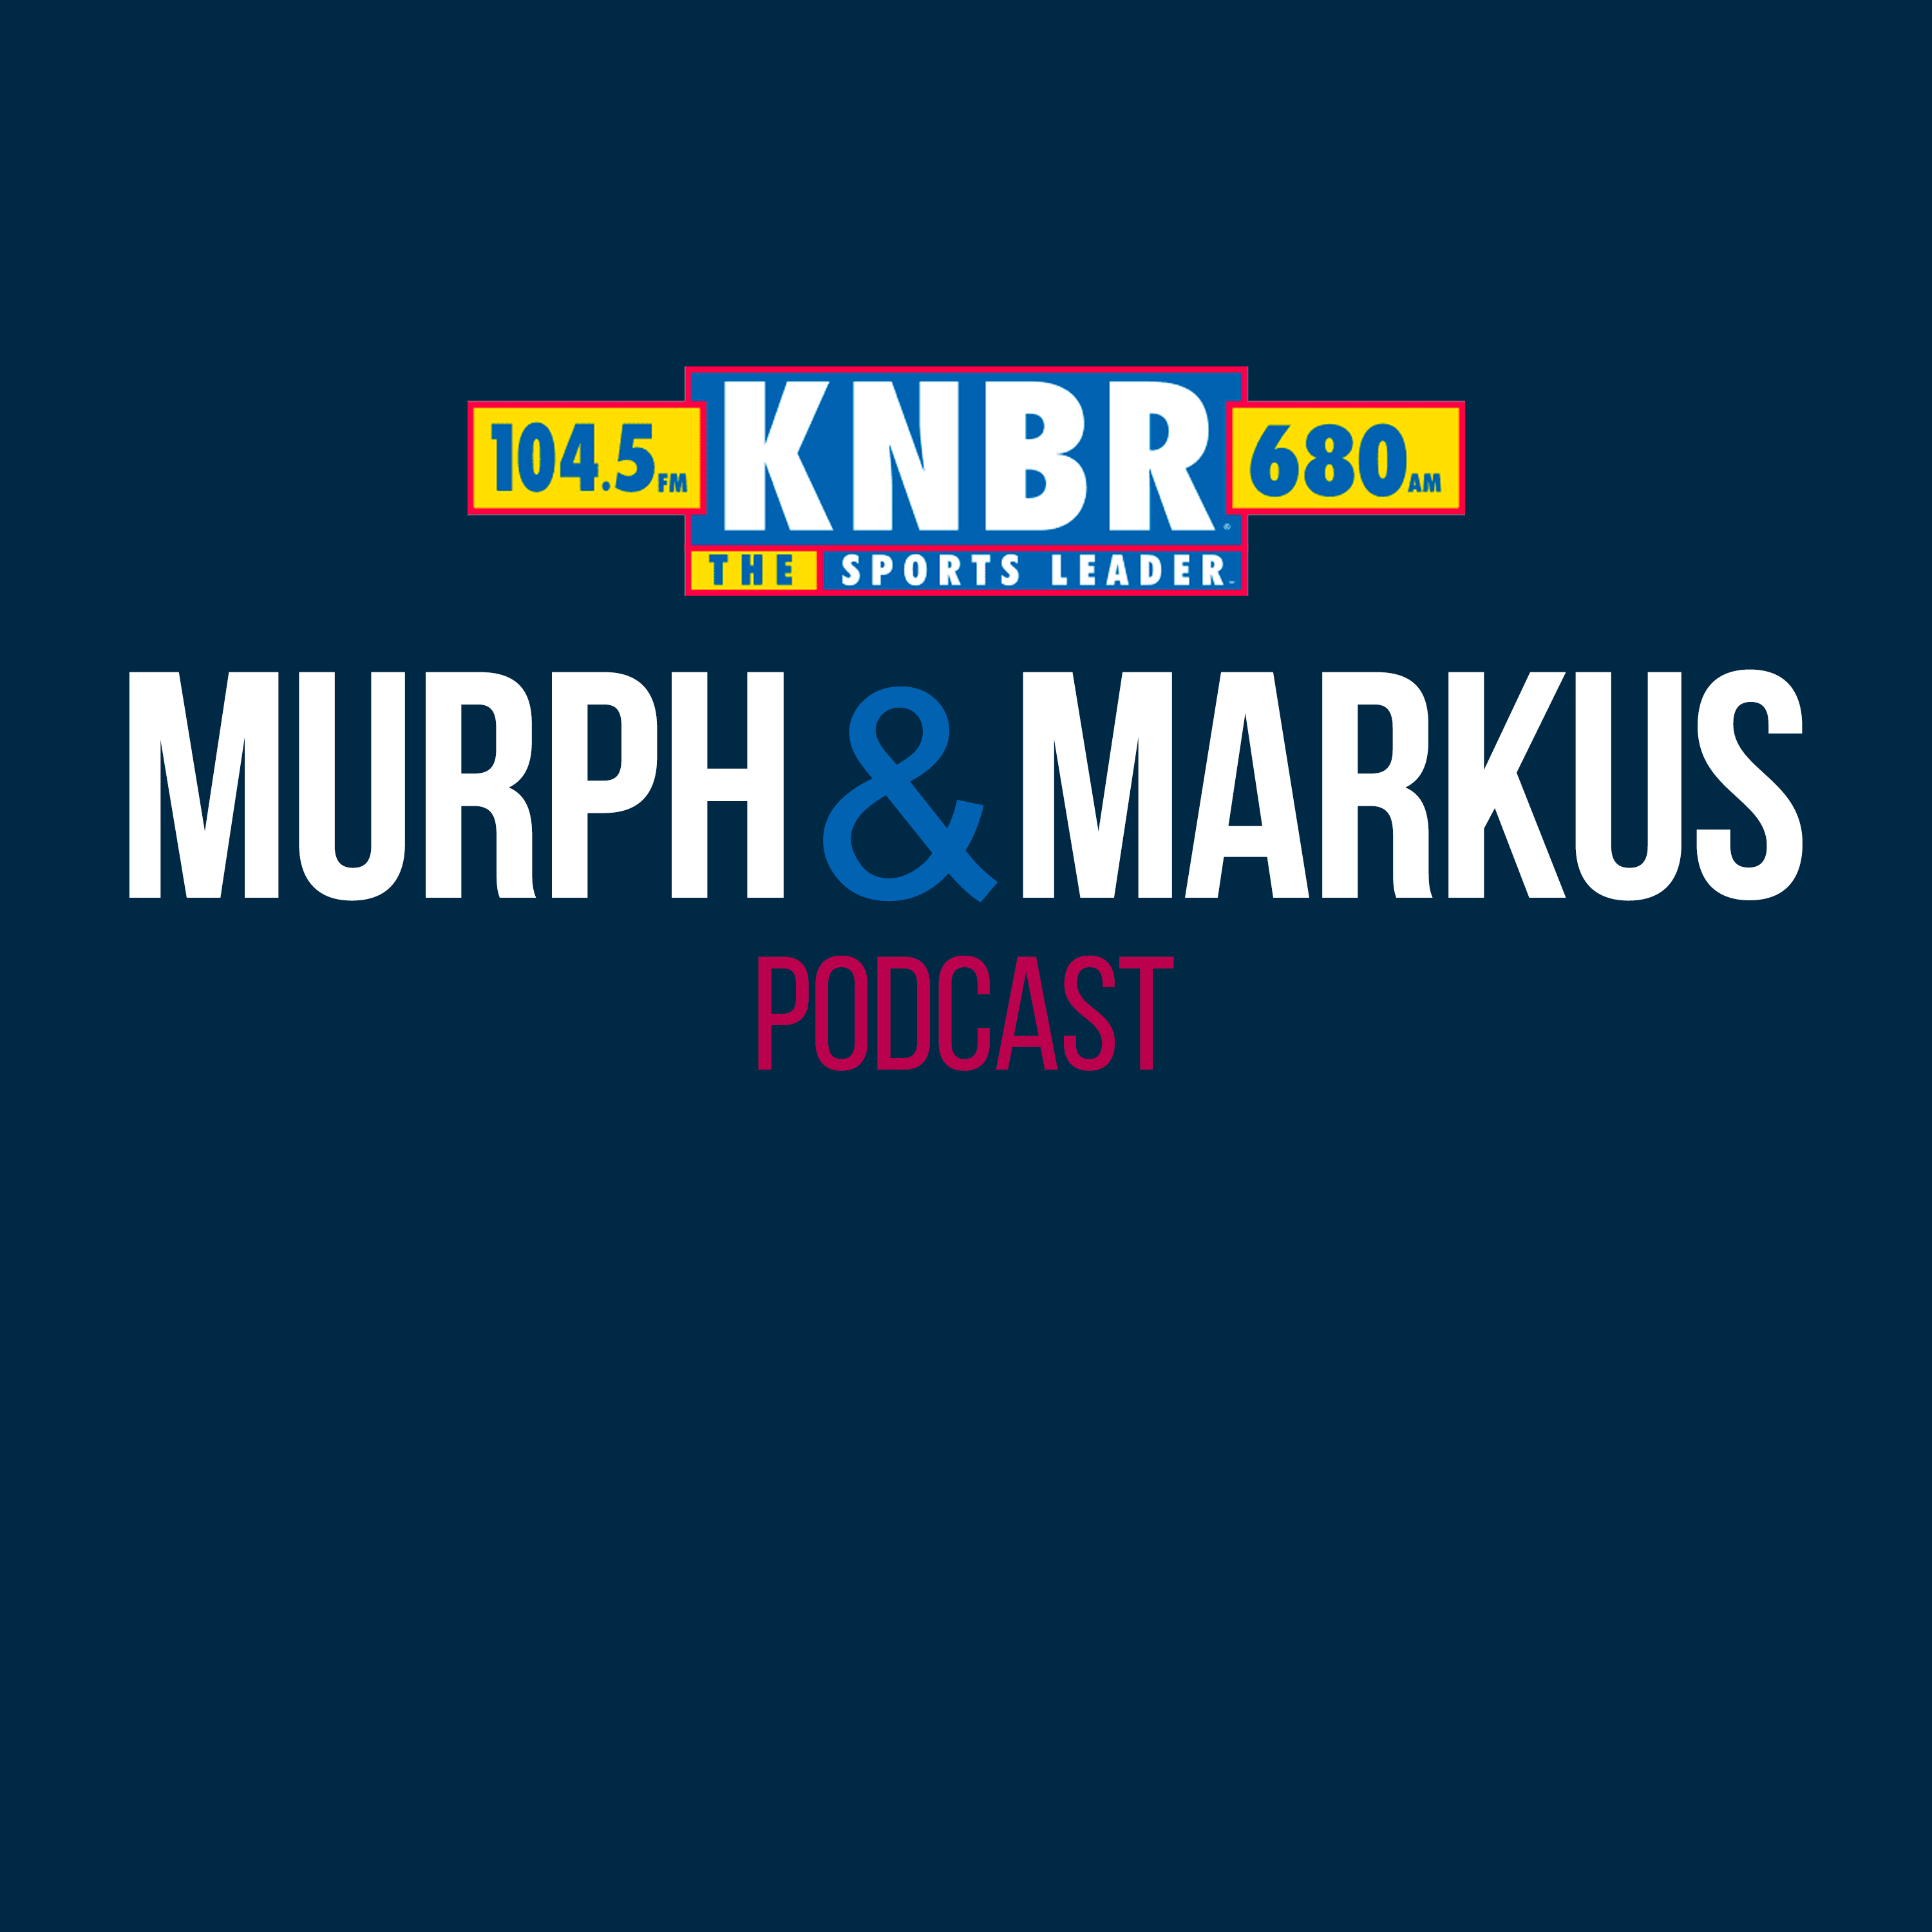 5-2 Hour 2: Murph & Markus discuss the Warriors offseason plans, talk to Susan Slusser, & get into today's top story in the Big Hit